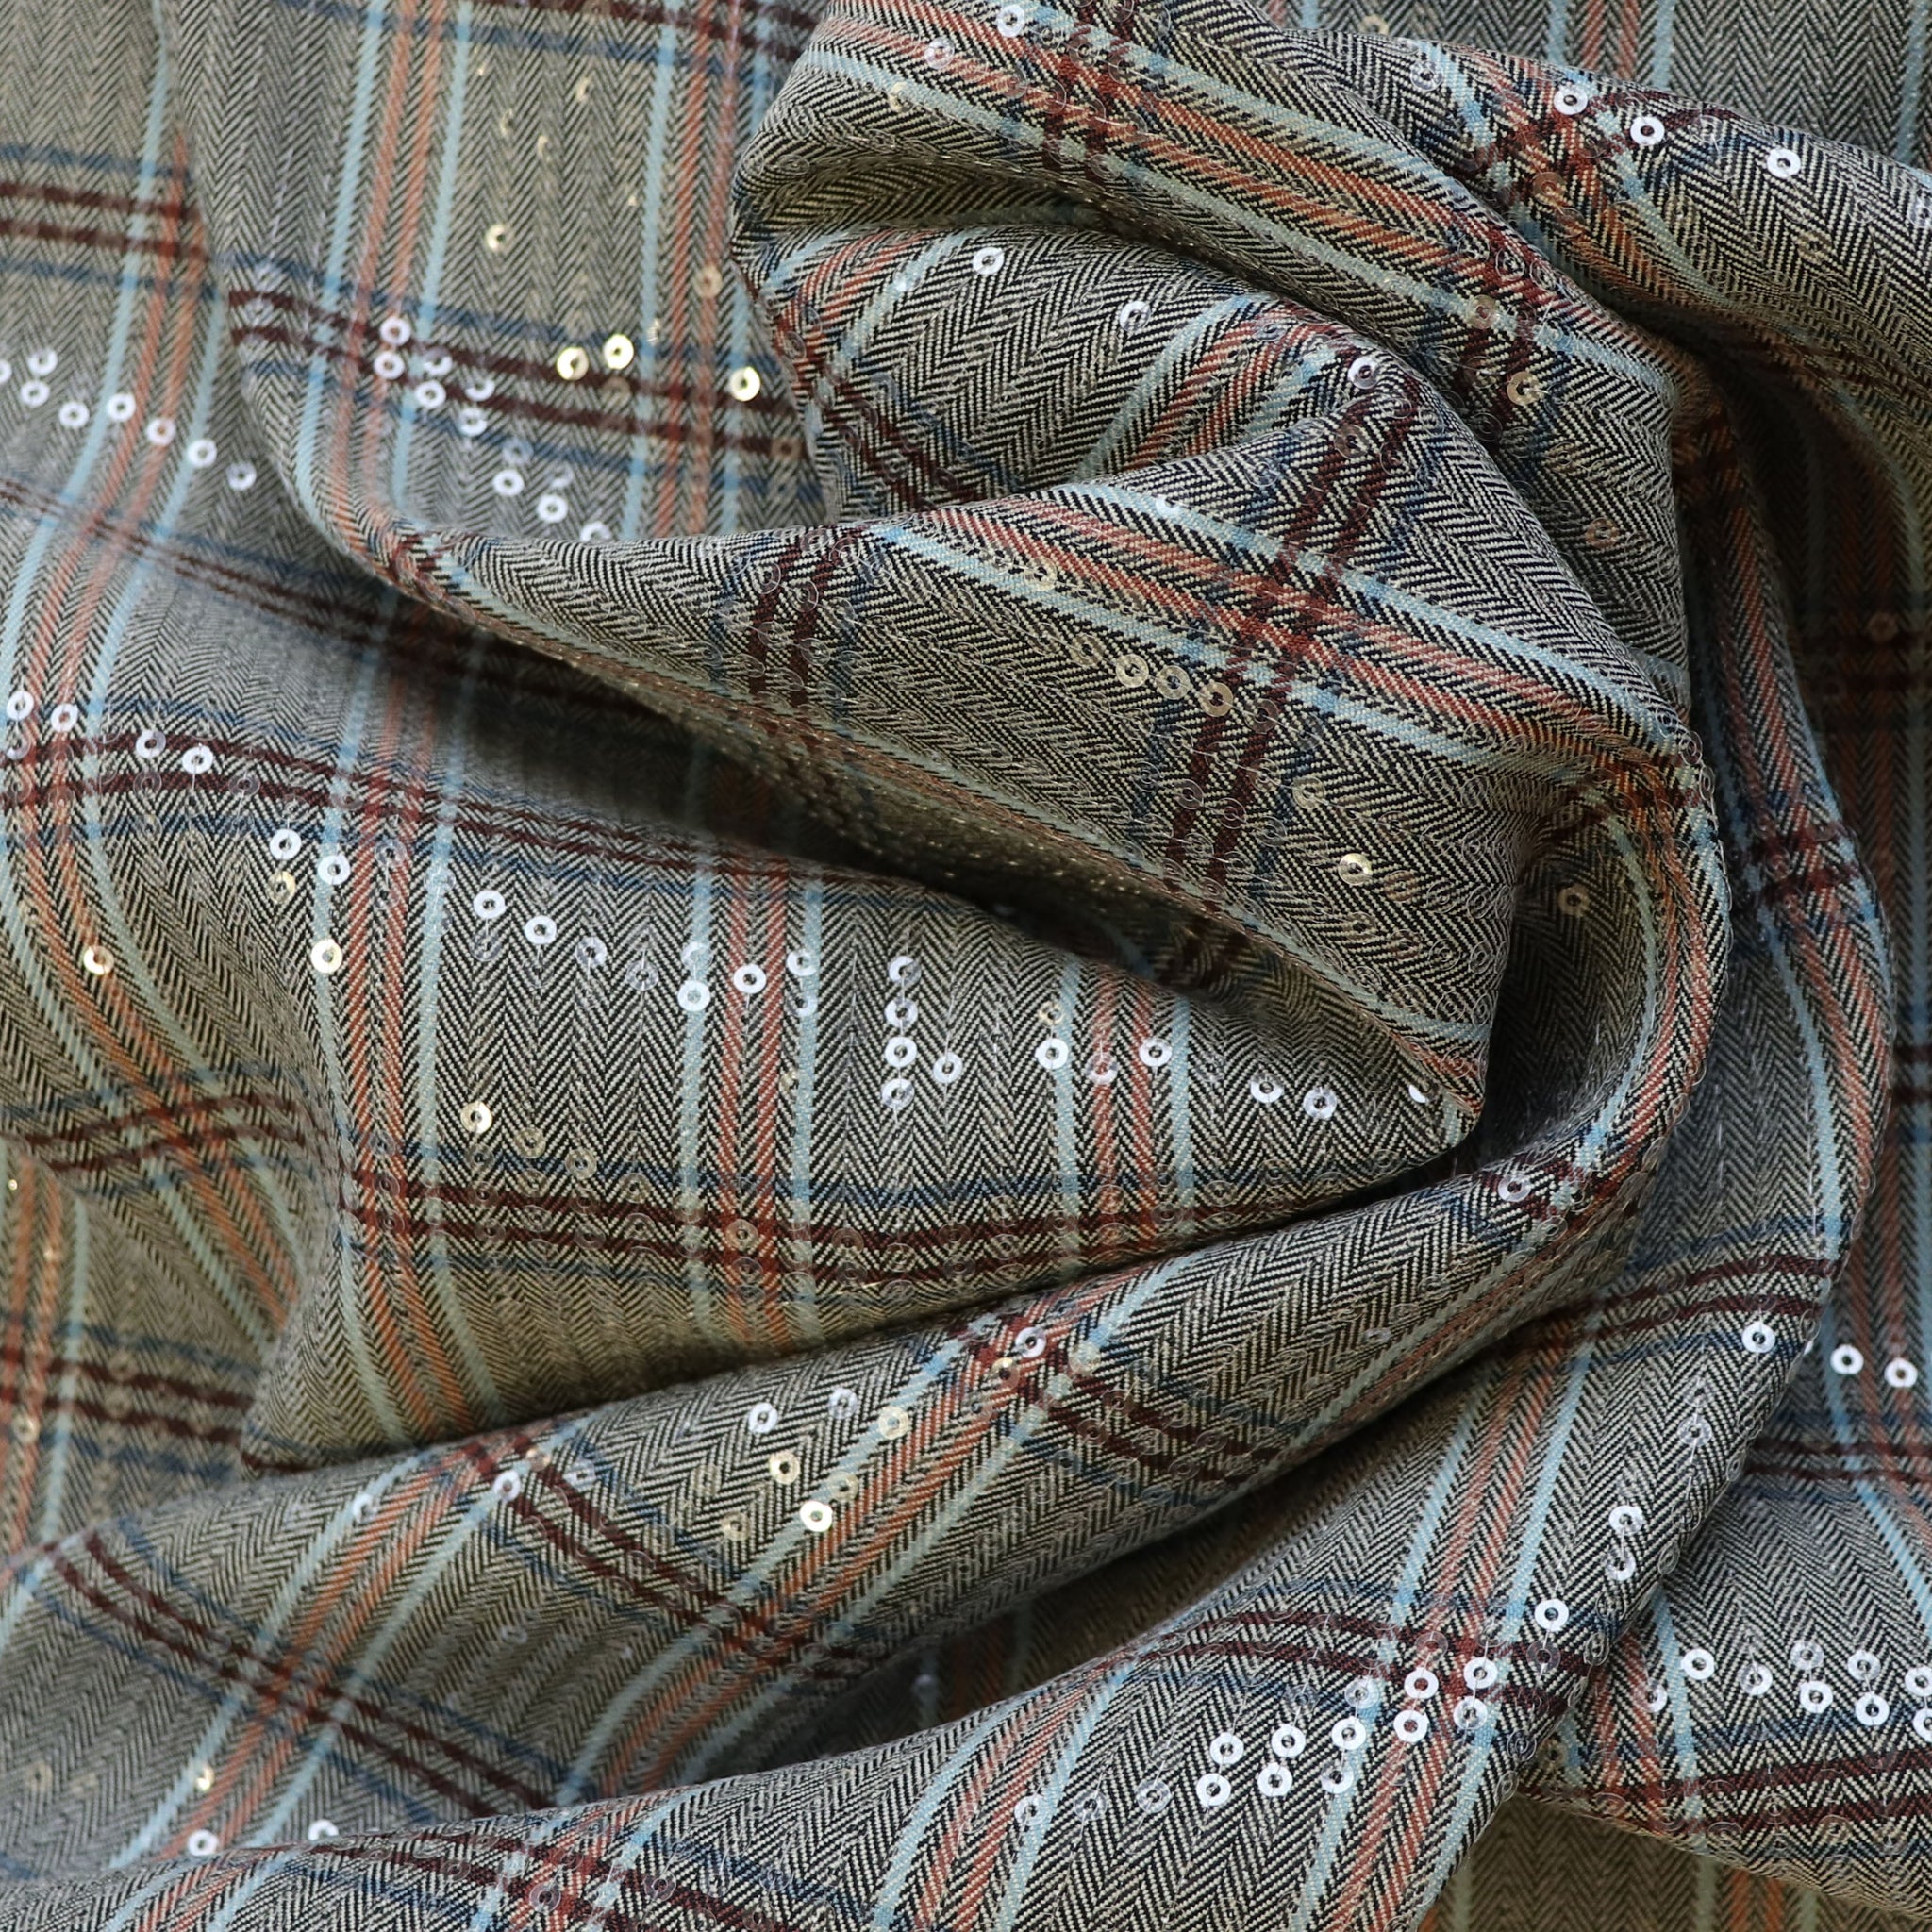 Polyester Rayon Blended Fabric-With Nice Herring Bone Texture